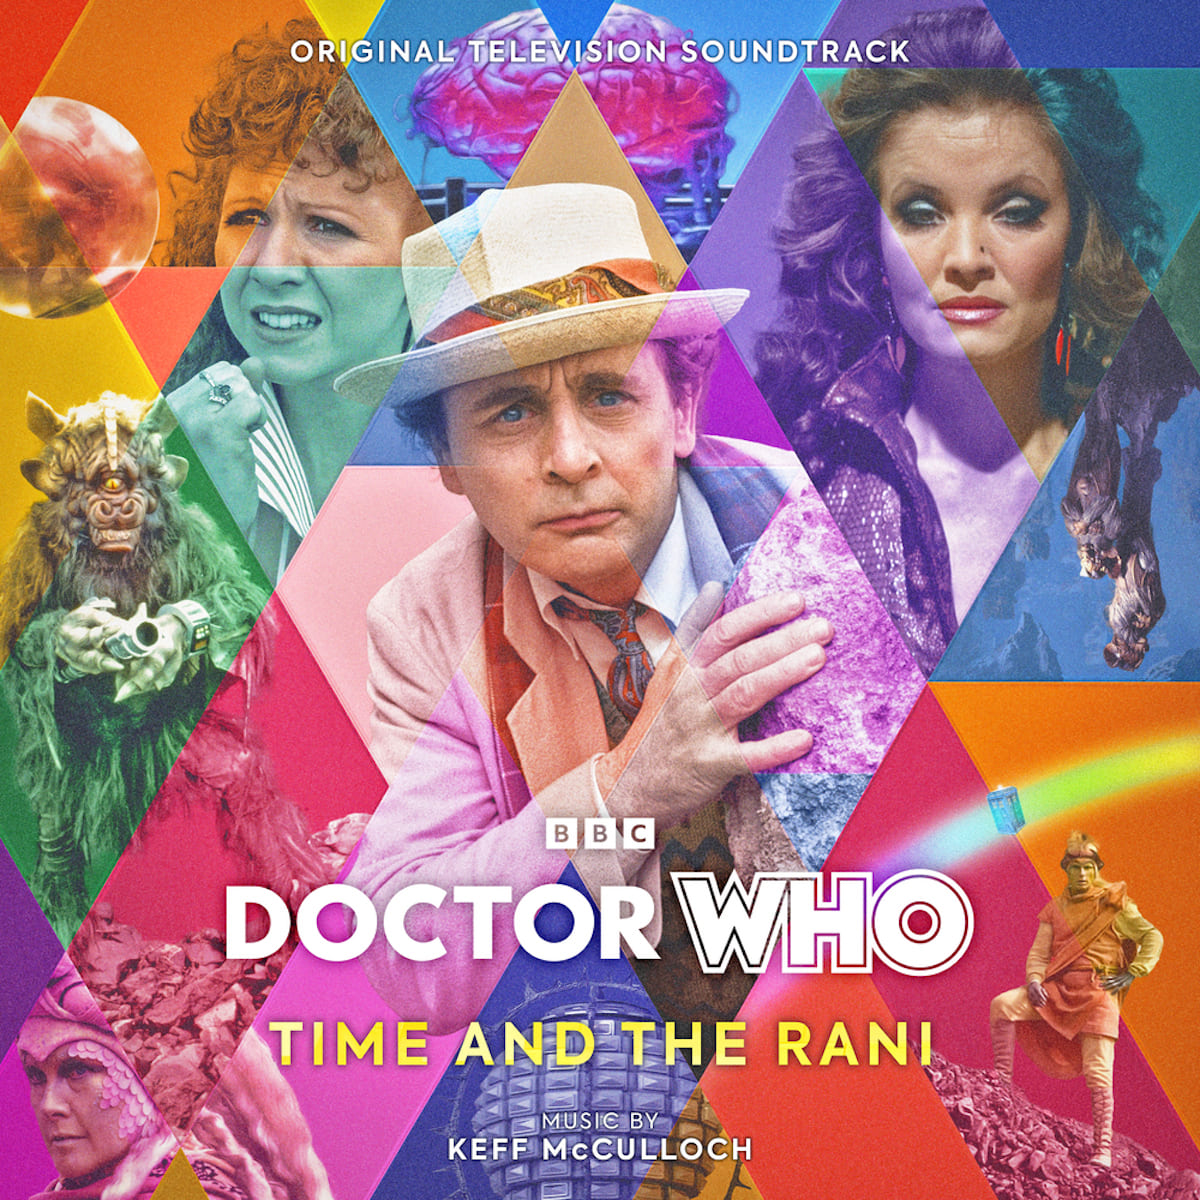 Time and the Rani: Original Television Soundtrack